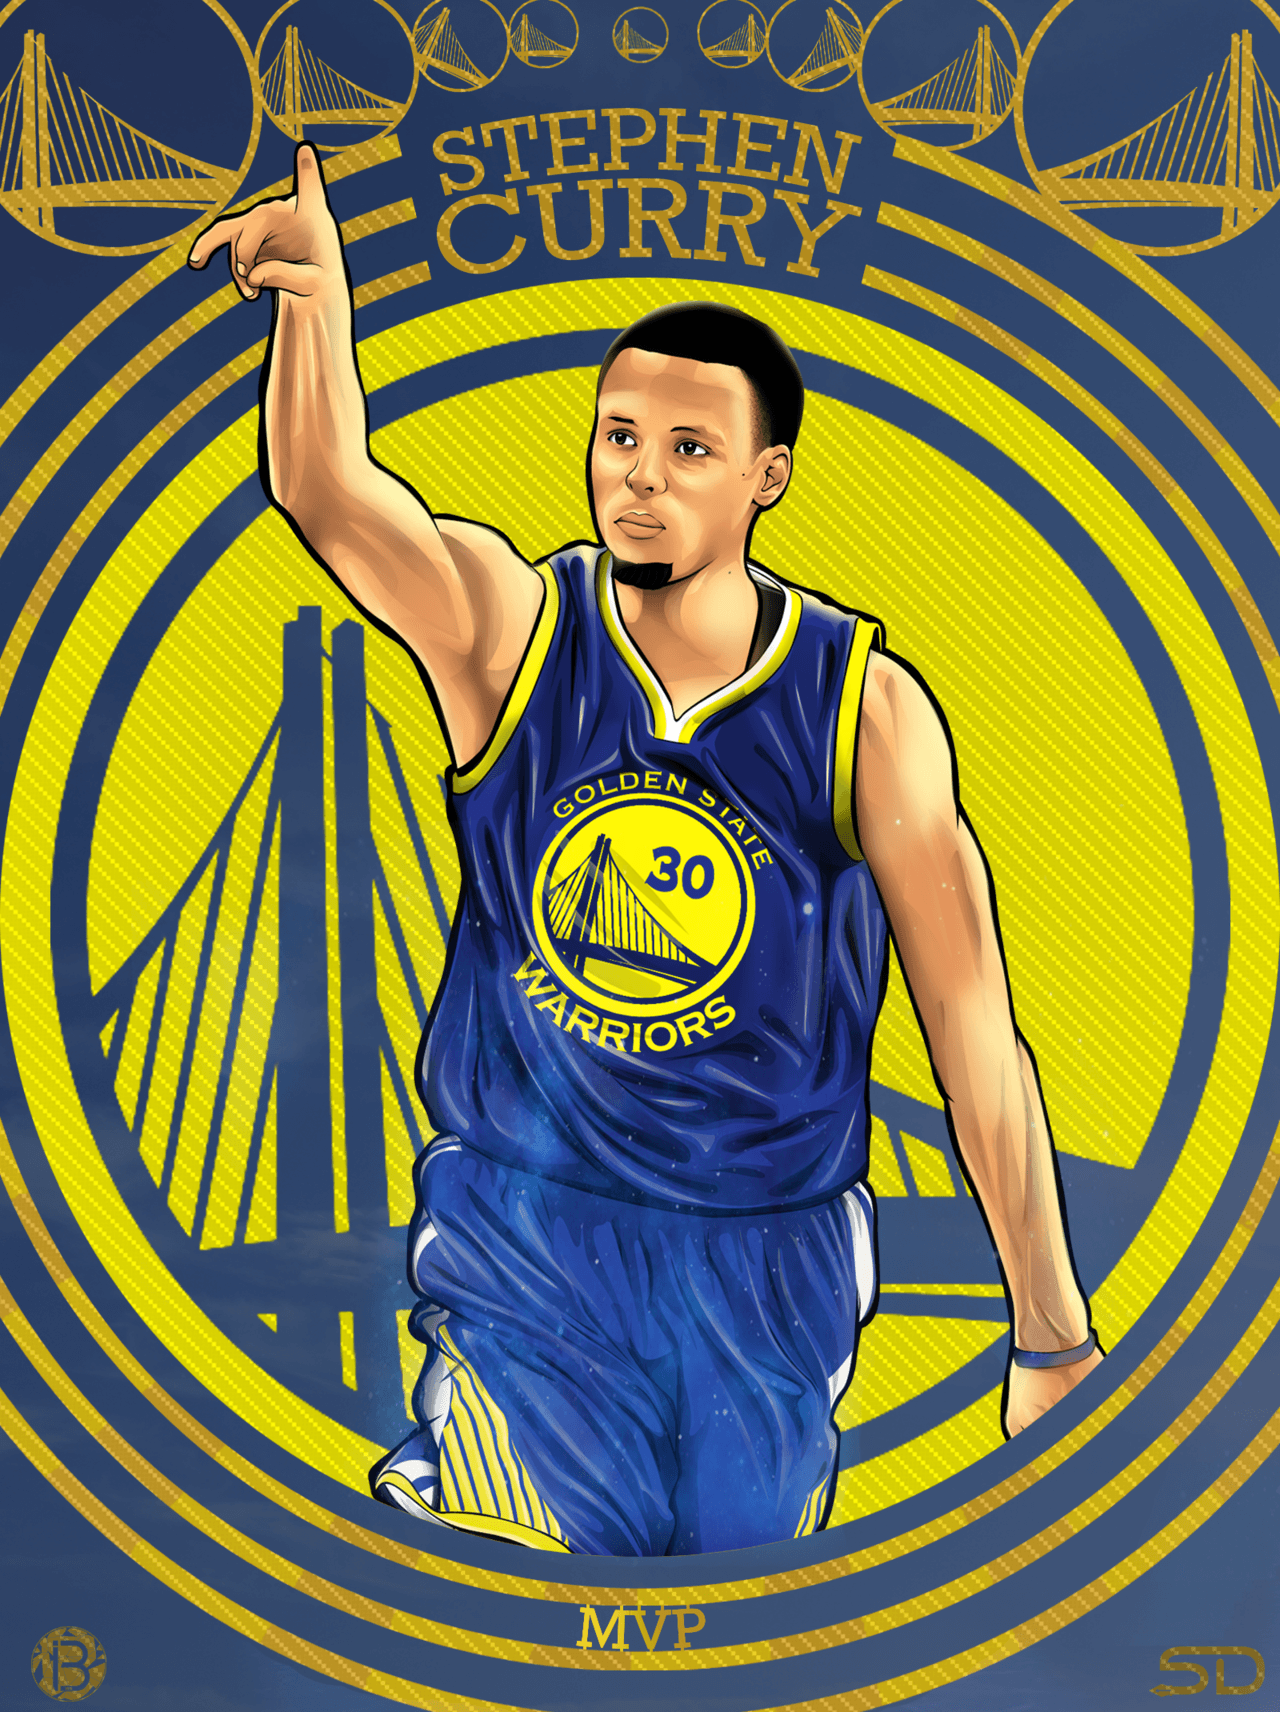 Stephen Curry 2018 Wallpapers - Wallpaper Cave